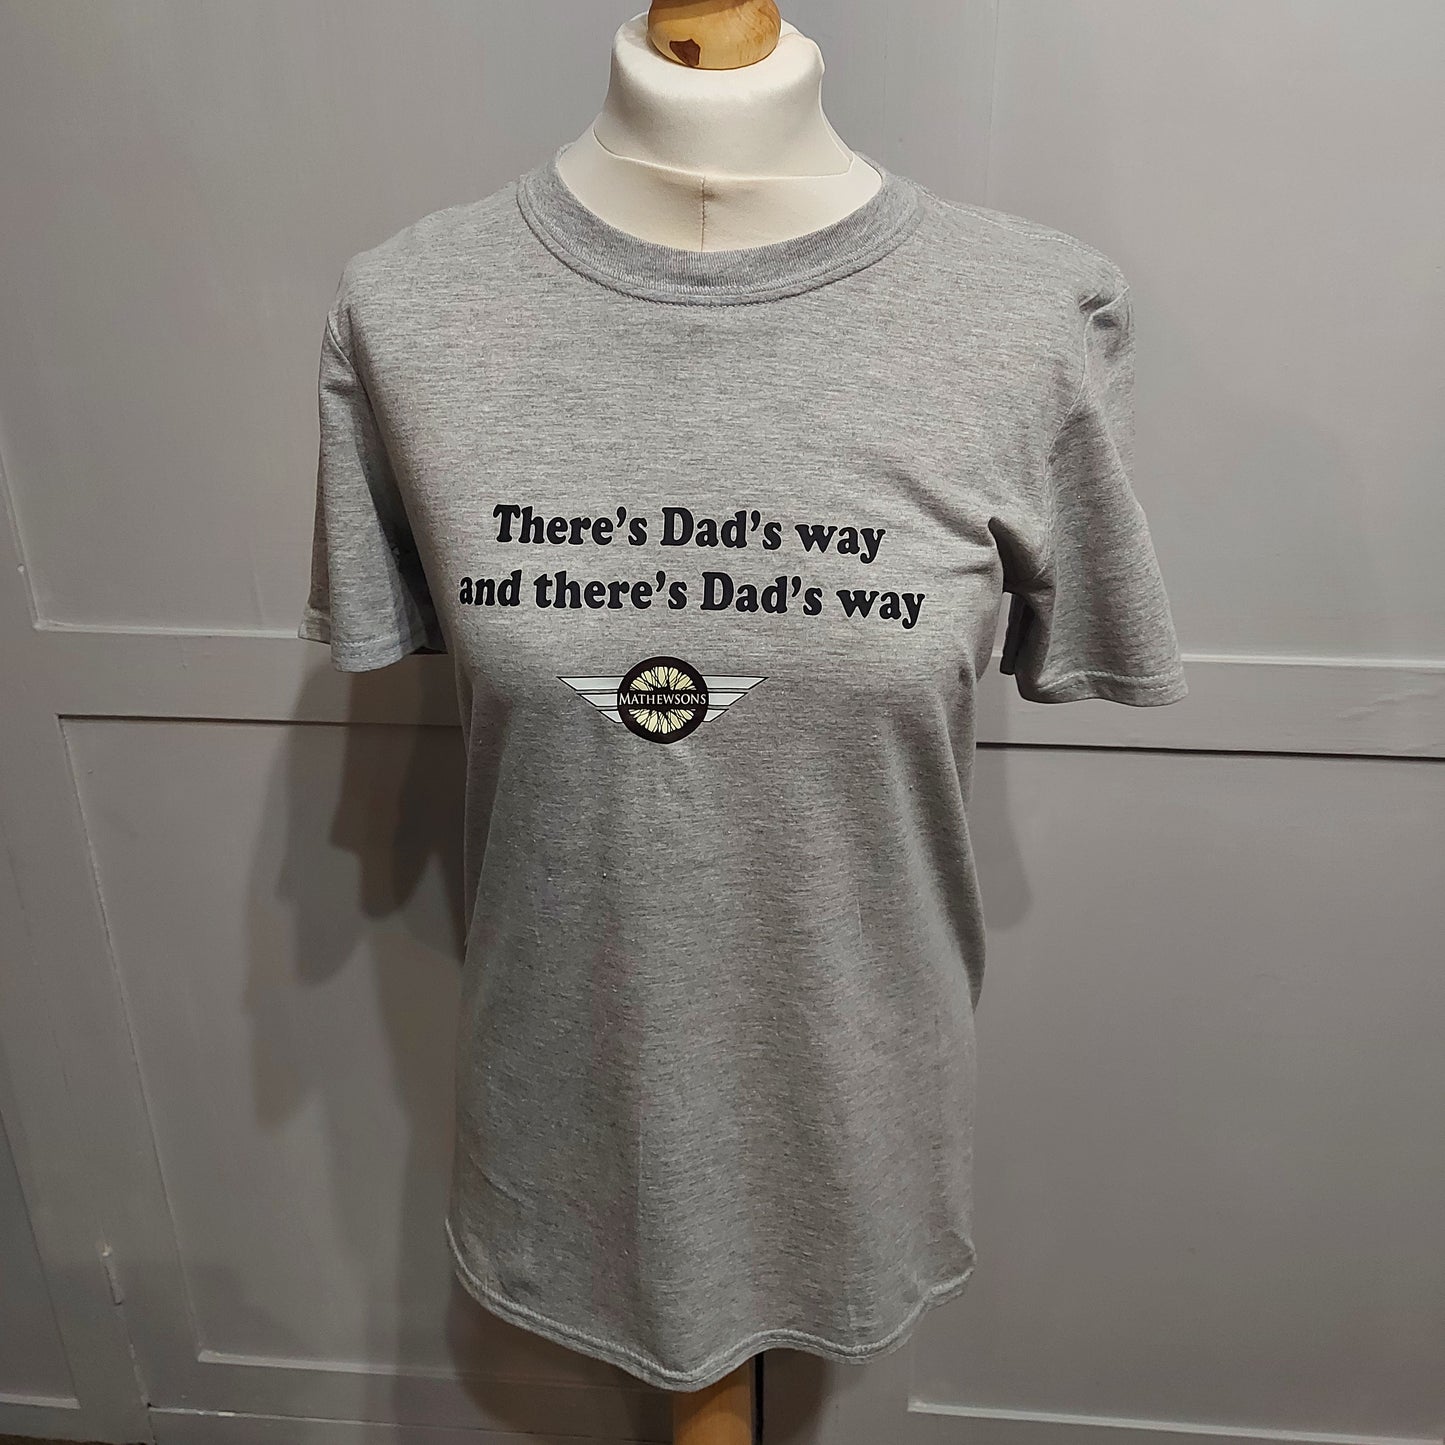 'There's Dad's way and there's Dad's way' T-shirt